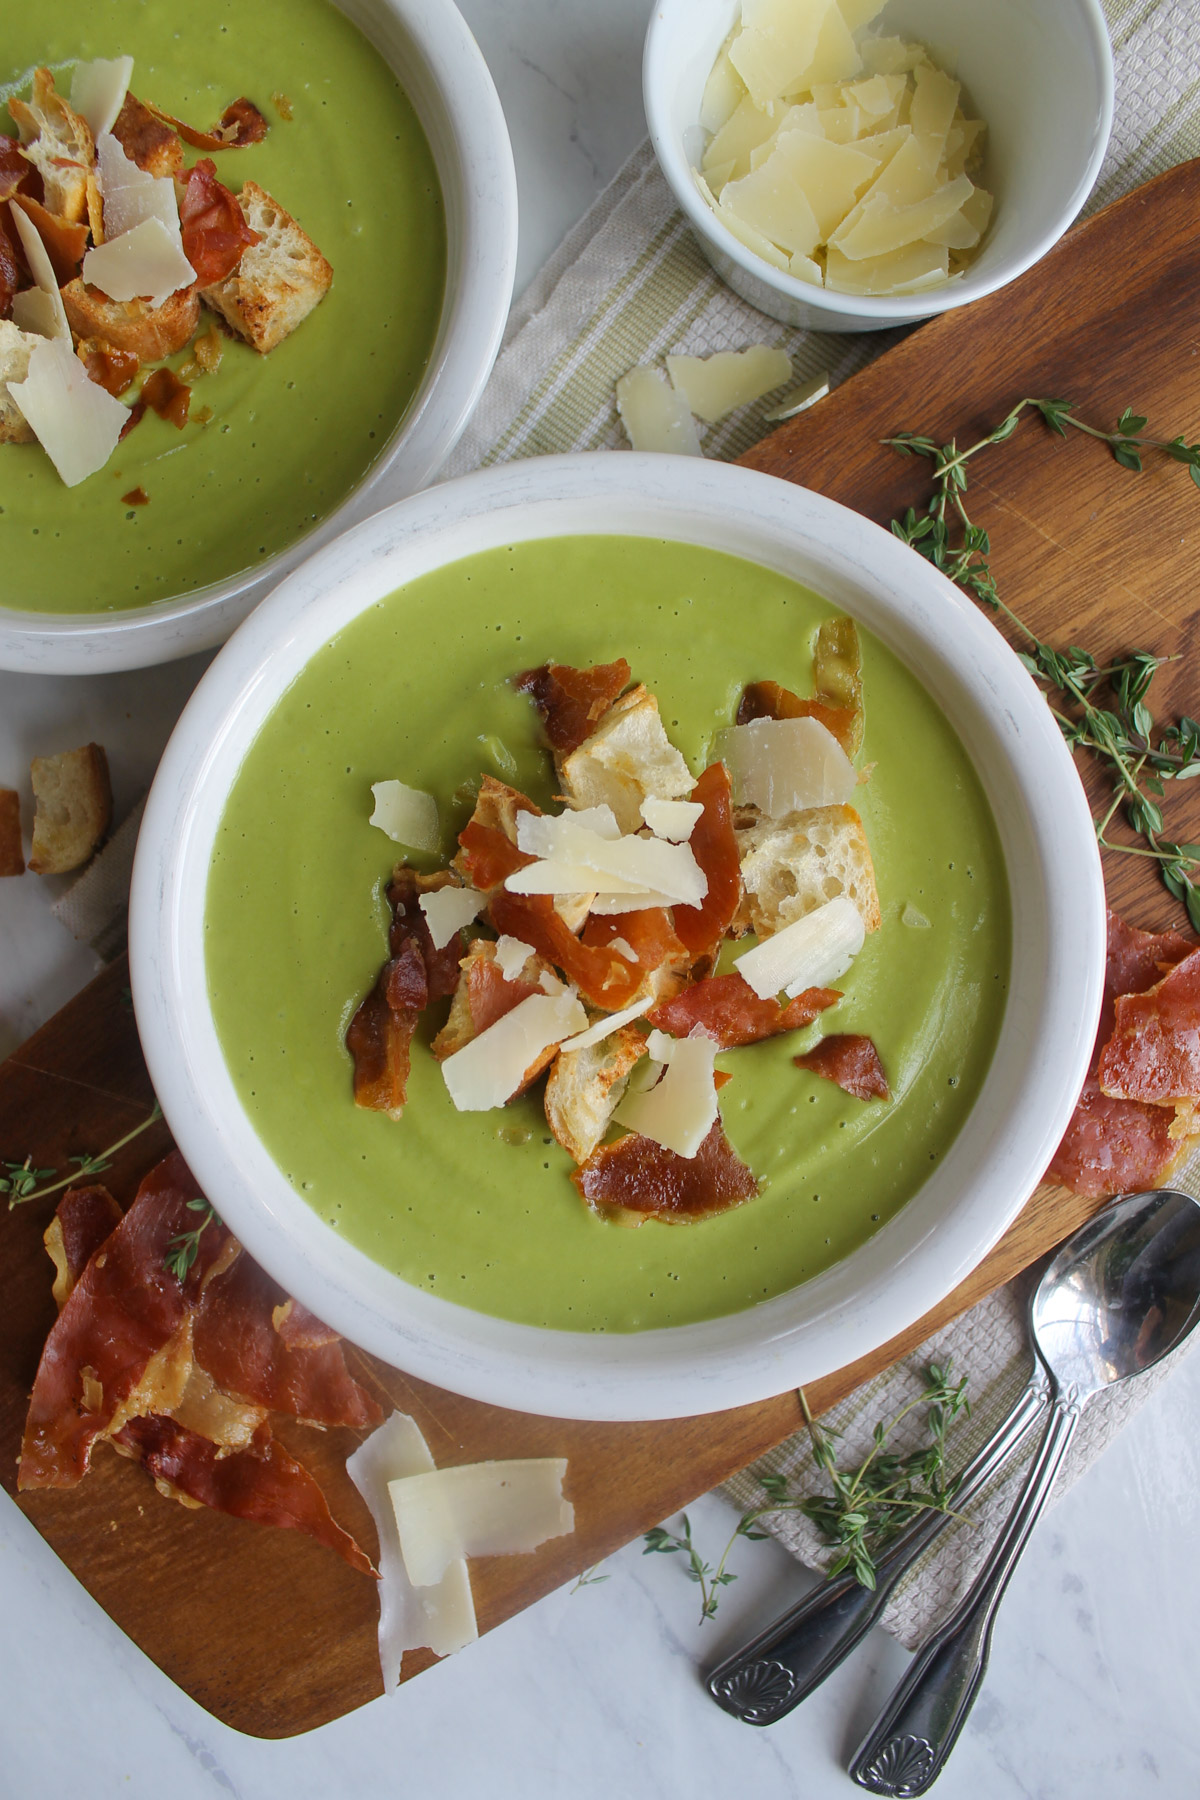 A bowl of green blended Asparagus Broccoli Soup with croutons, crispy prosciutto and Parmesan cheese toppings.